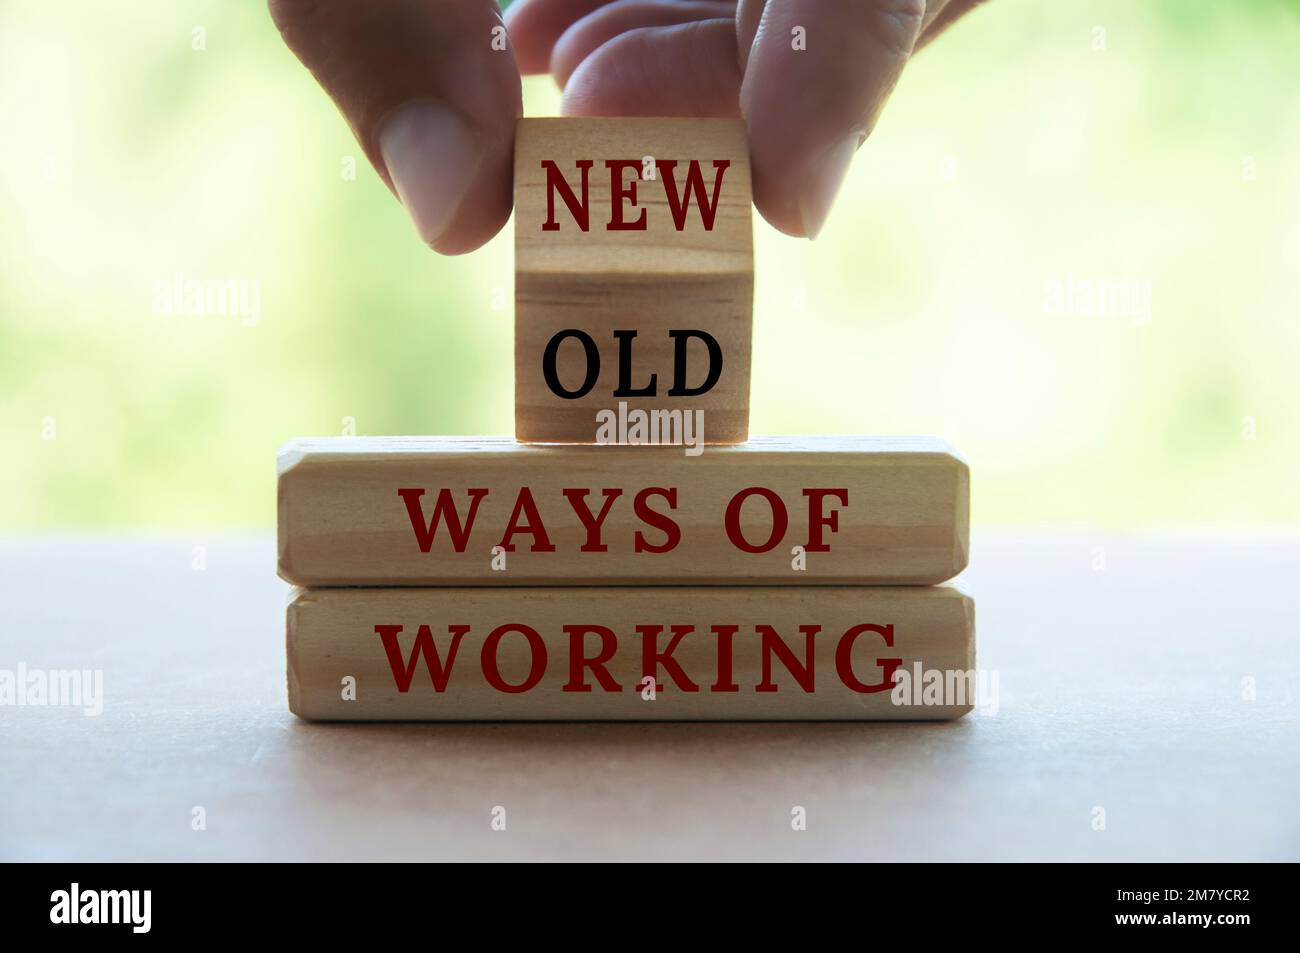 Hand turning wooden cube text from OLD to NEW ways of working. New normal and business concept Stock Photo